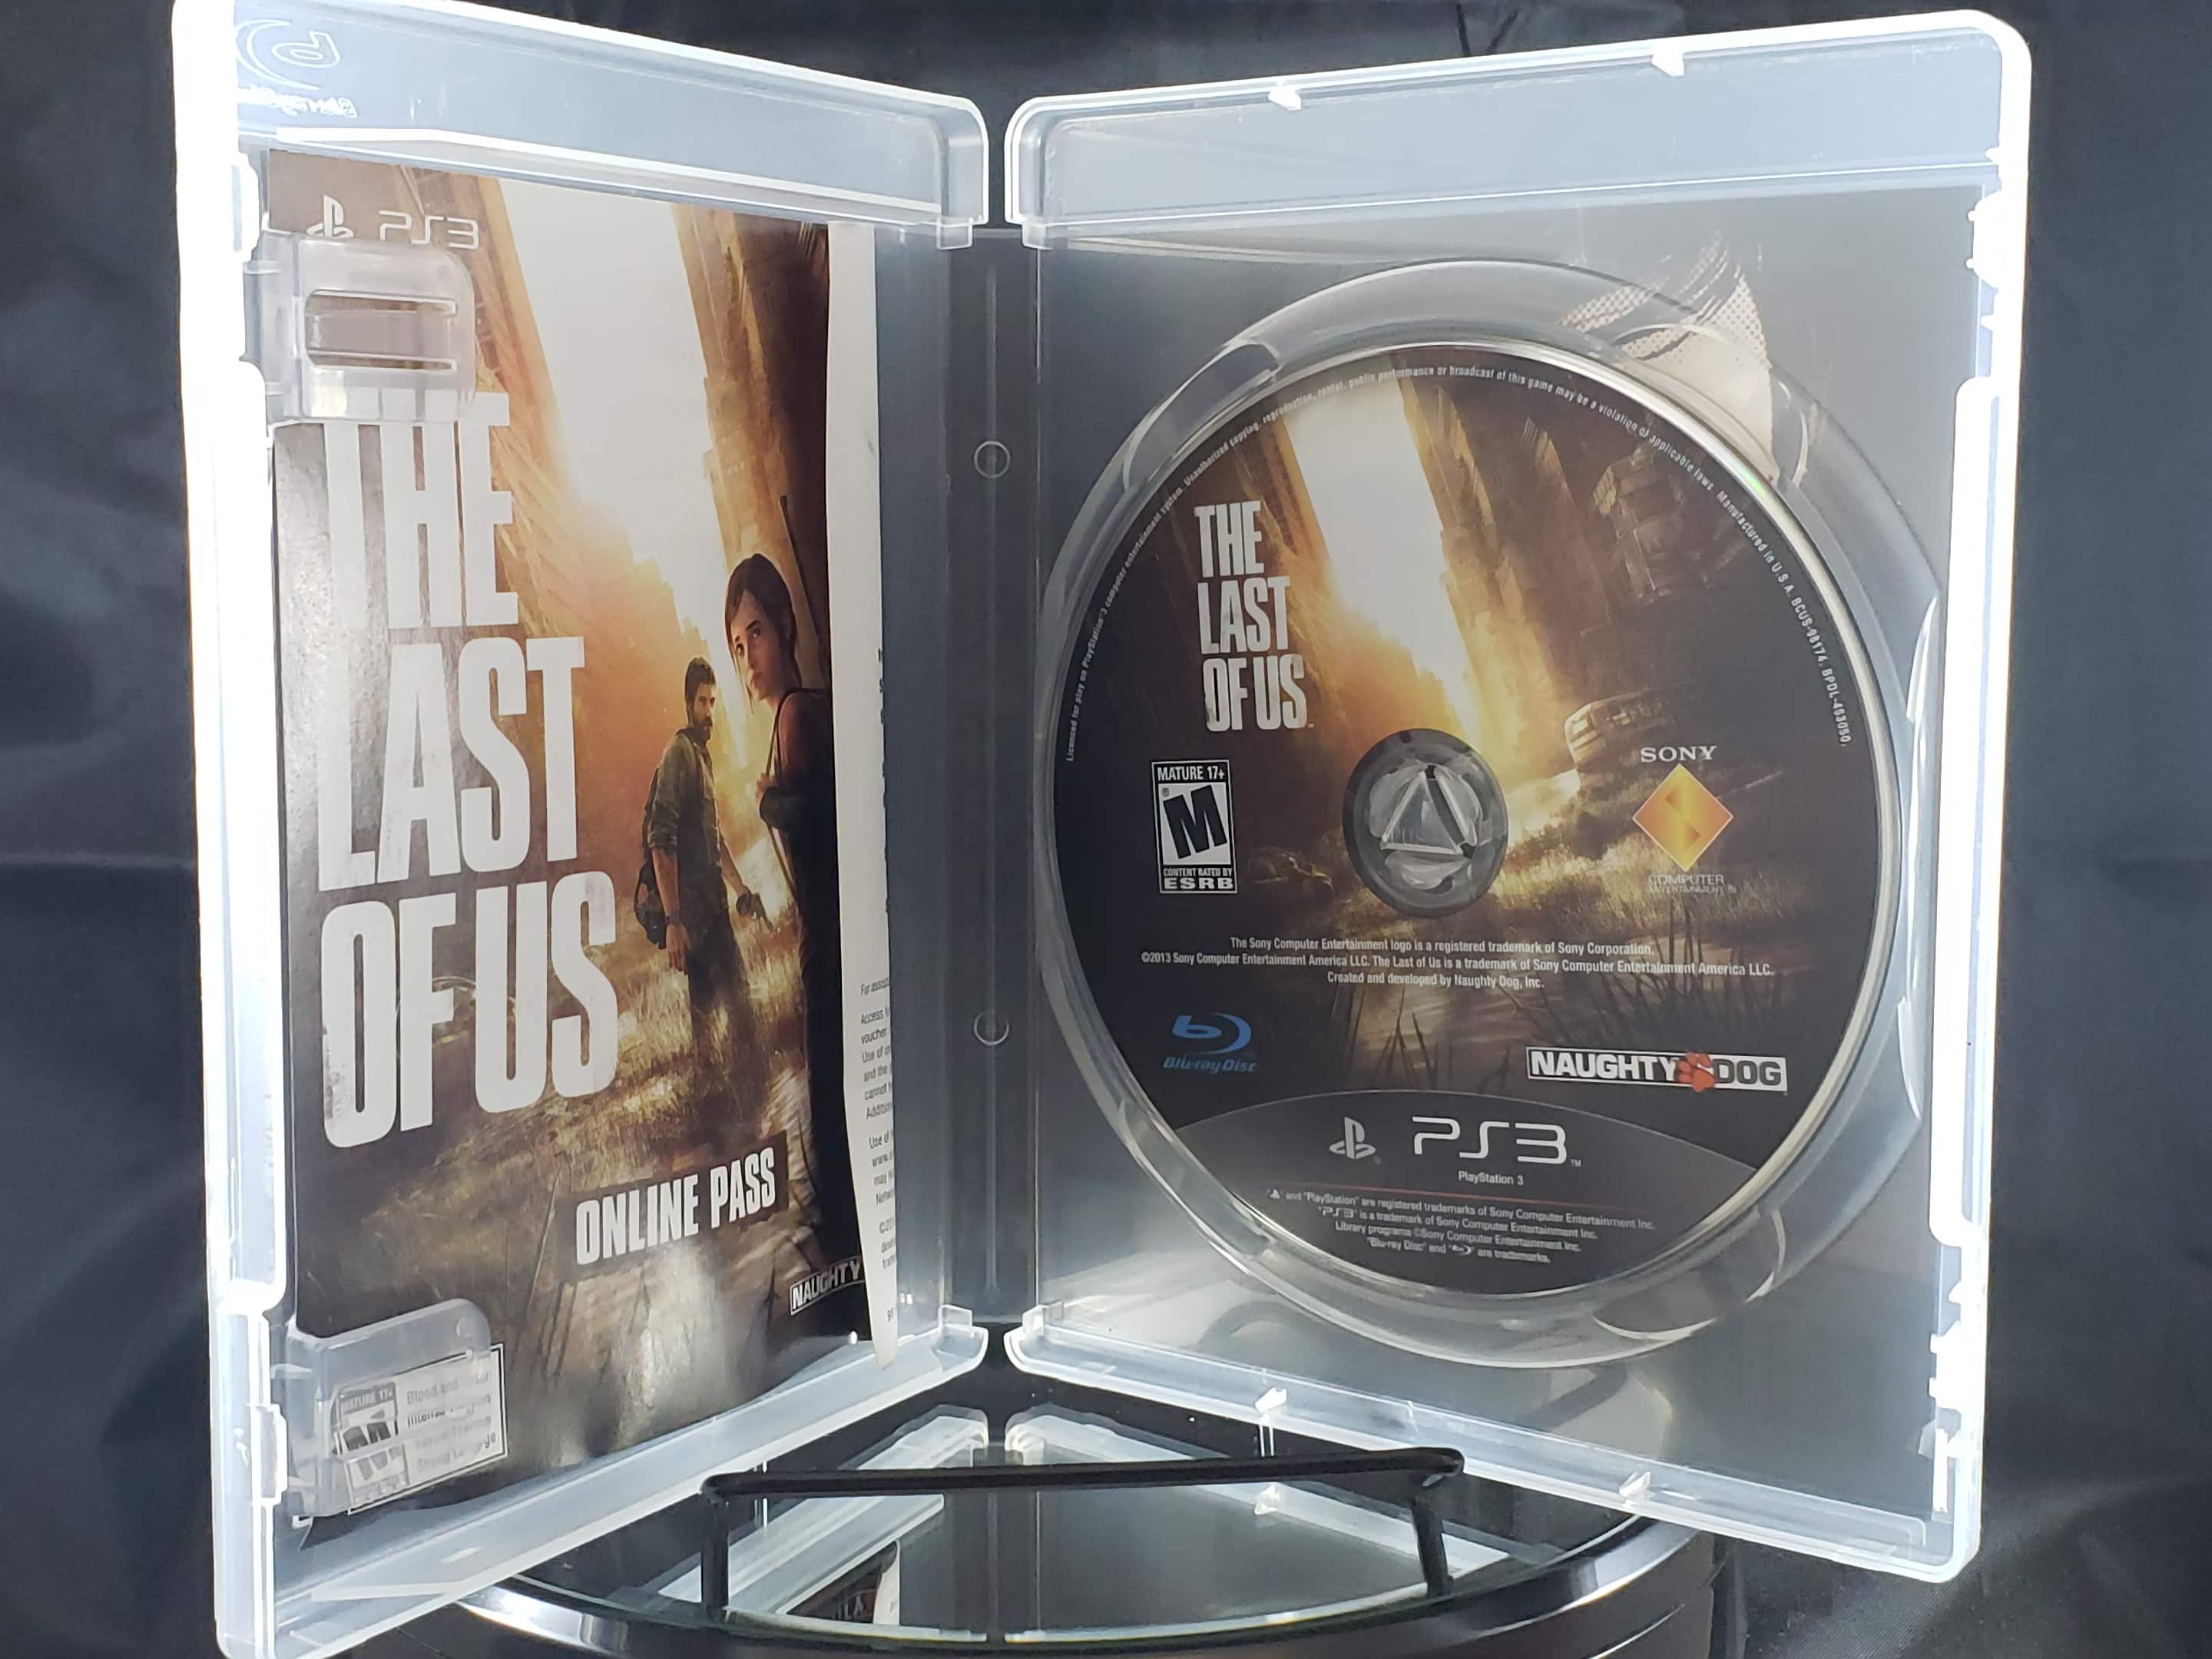 The Last Of Us - PlayStation 3 (PS3) Game